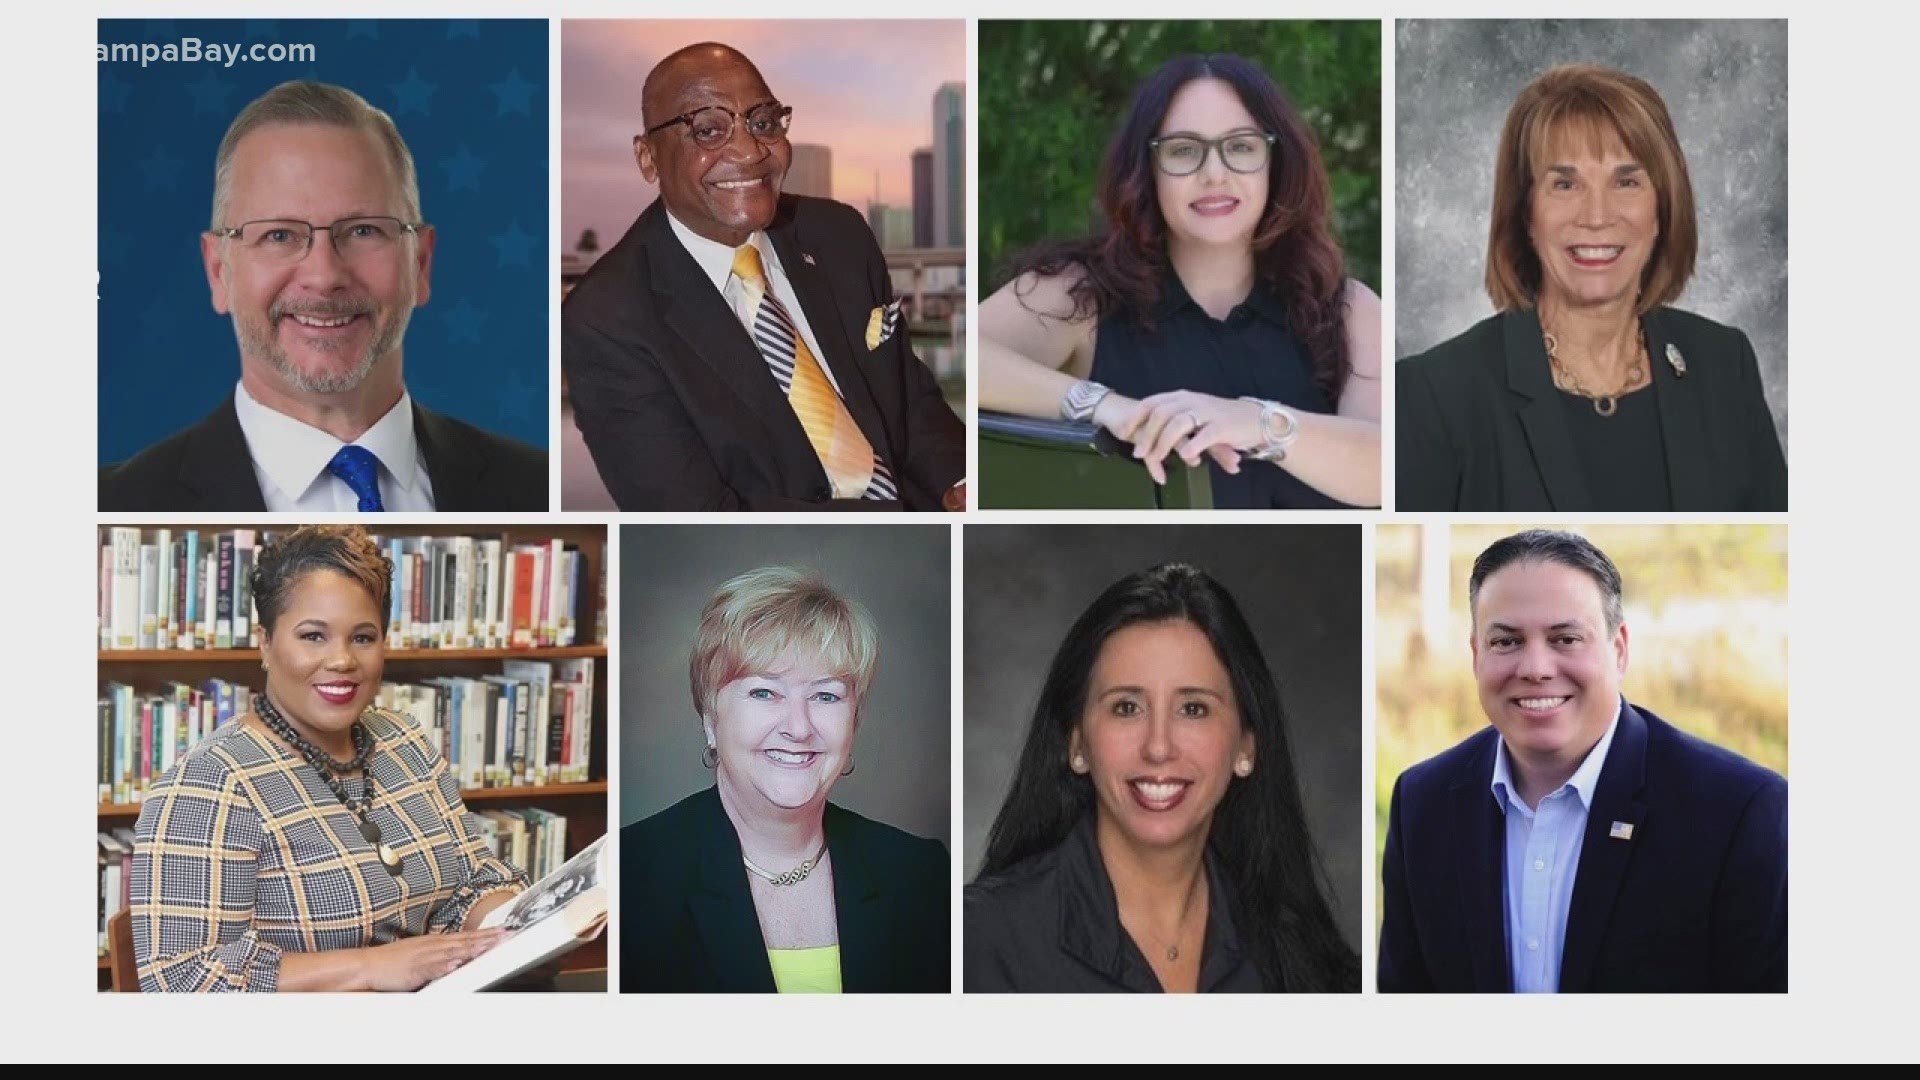 Eight candidates will face off Tuesday in runoff elections for positions on the Hillsborough County School Board.